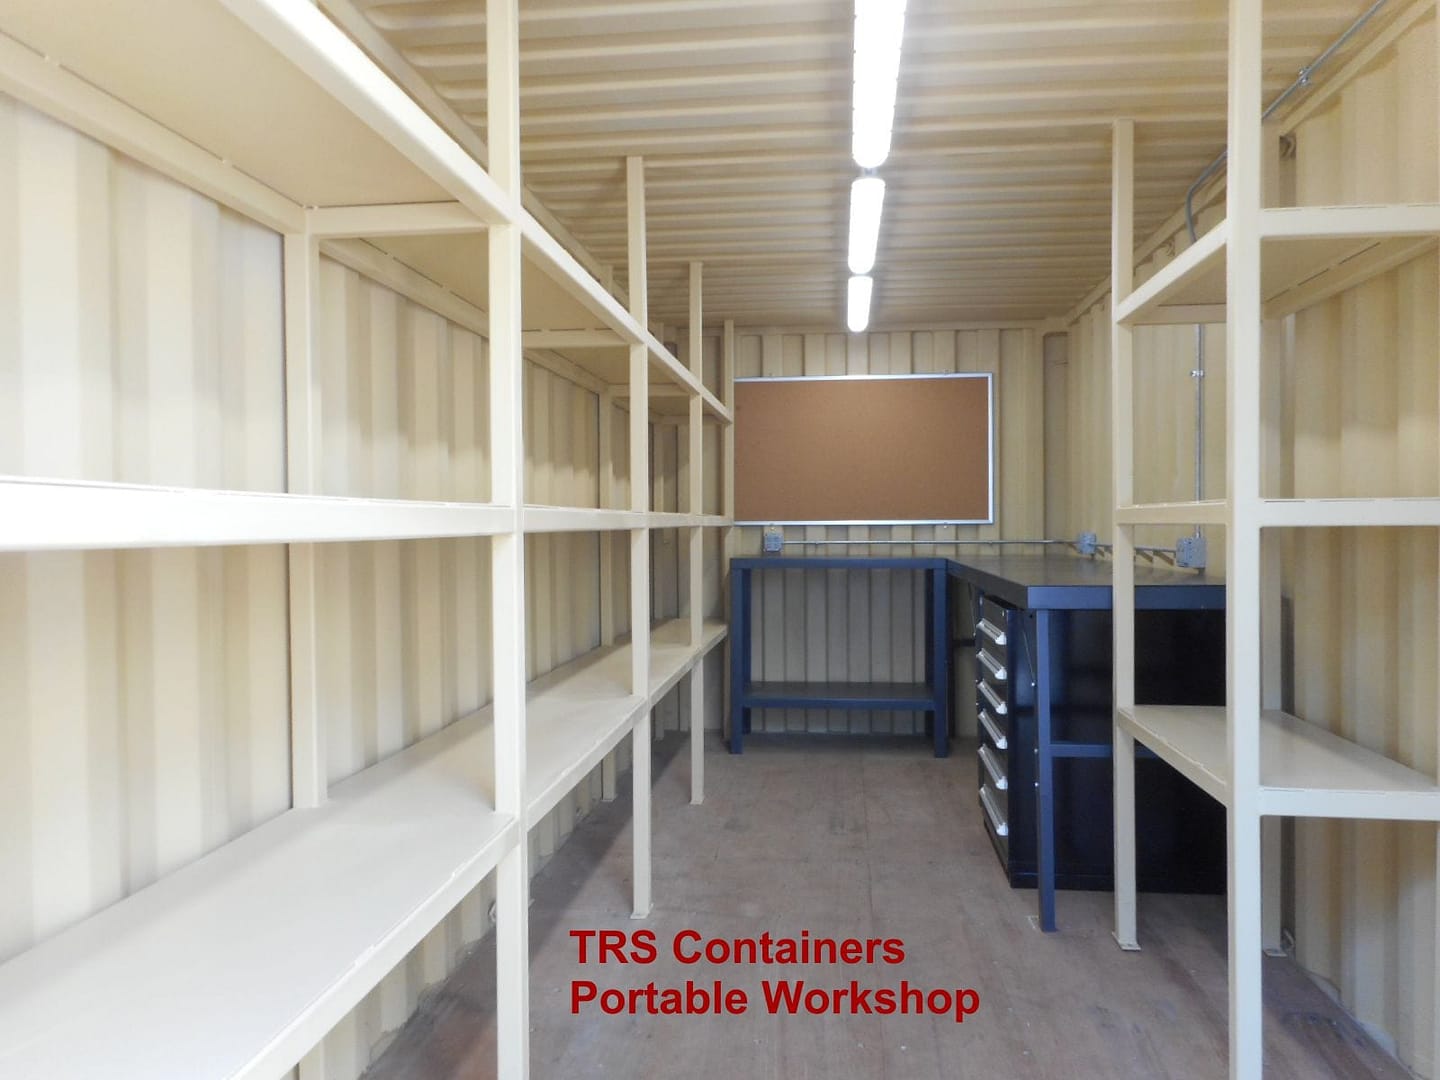 Container modifications built to last and travel from site to site.